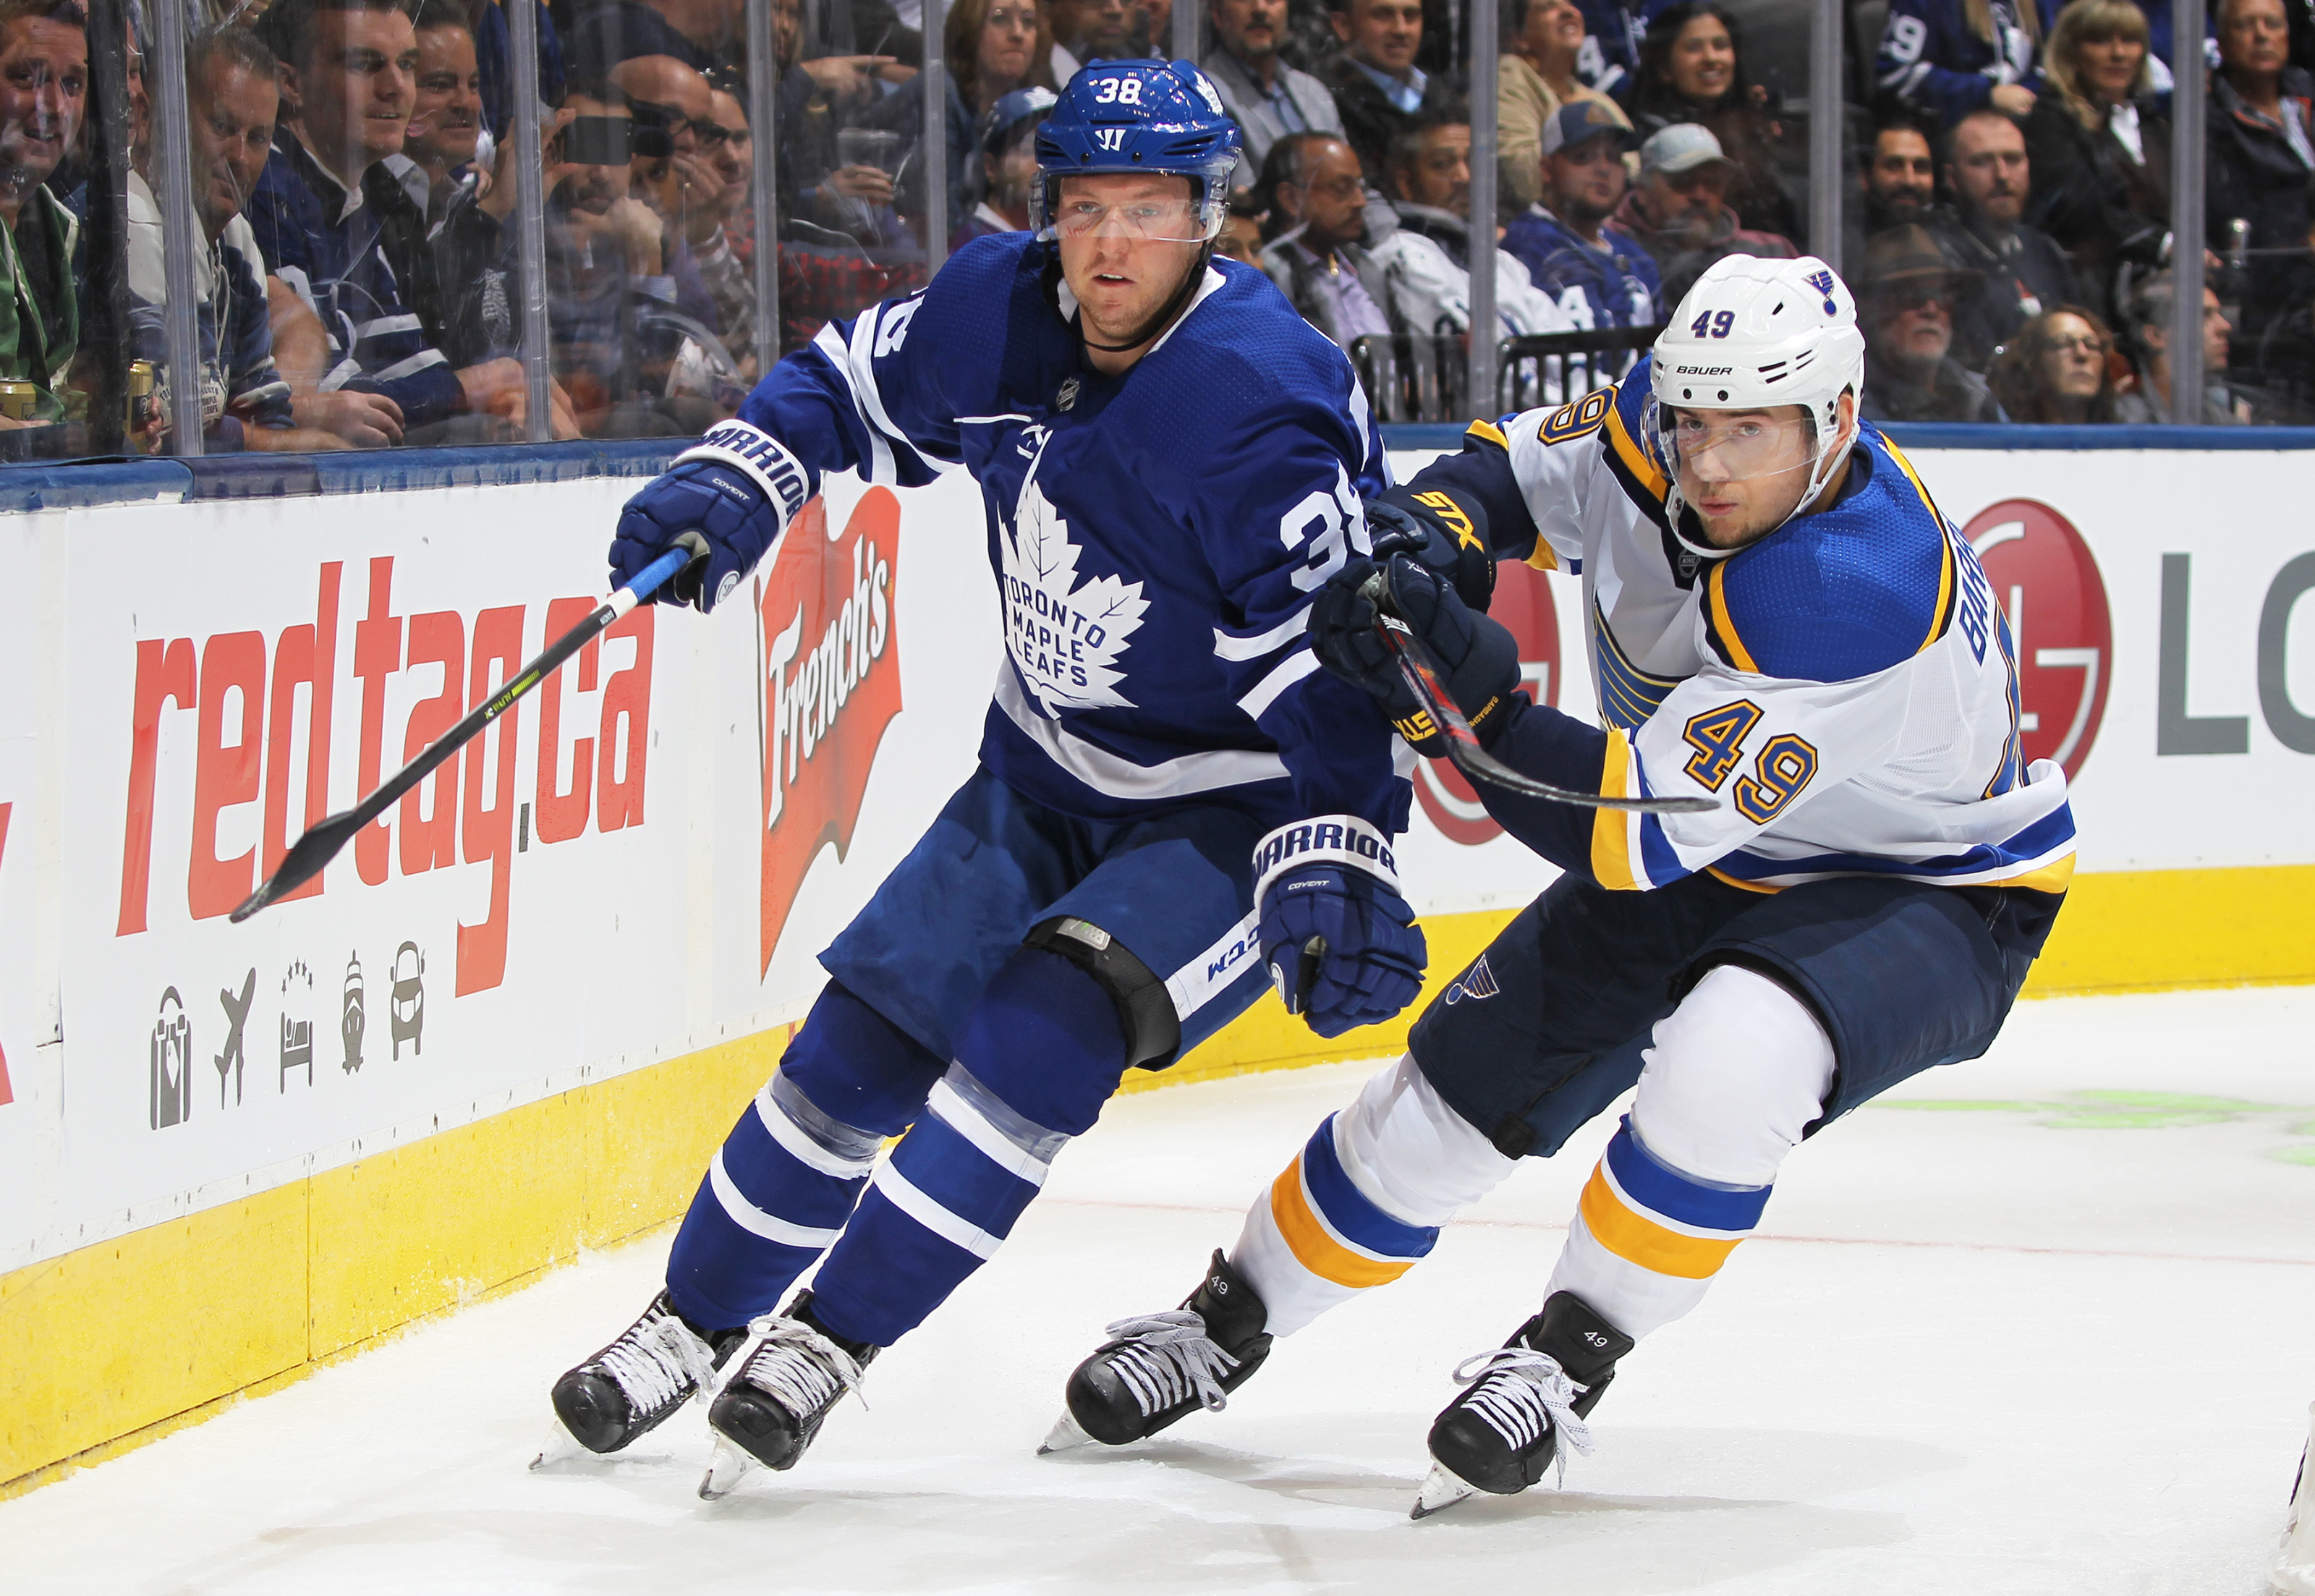 Toronto Maple Leafs should trade Cody Ceci and sign Dion Phaneuf